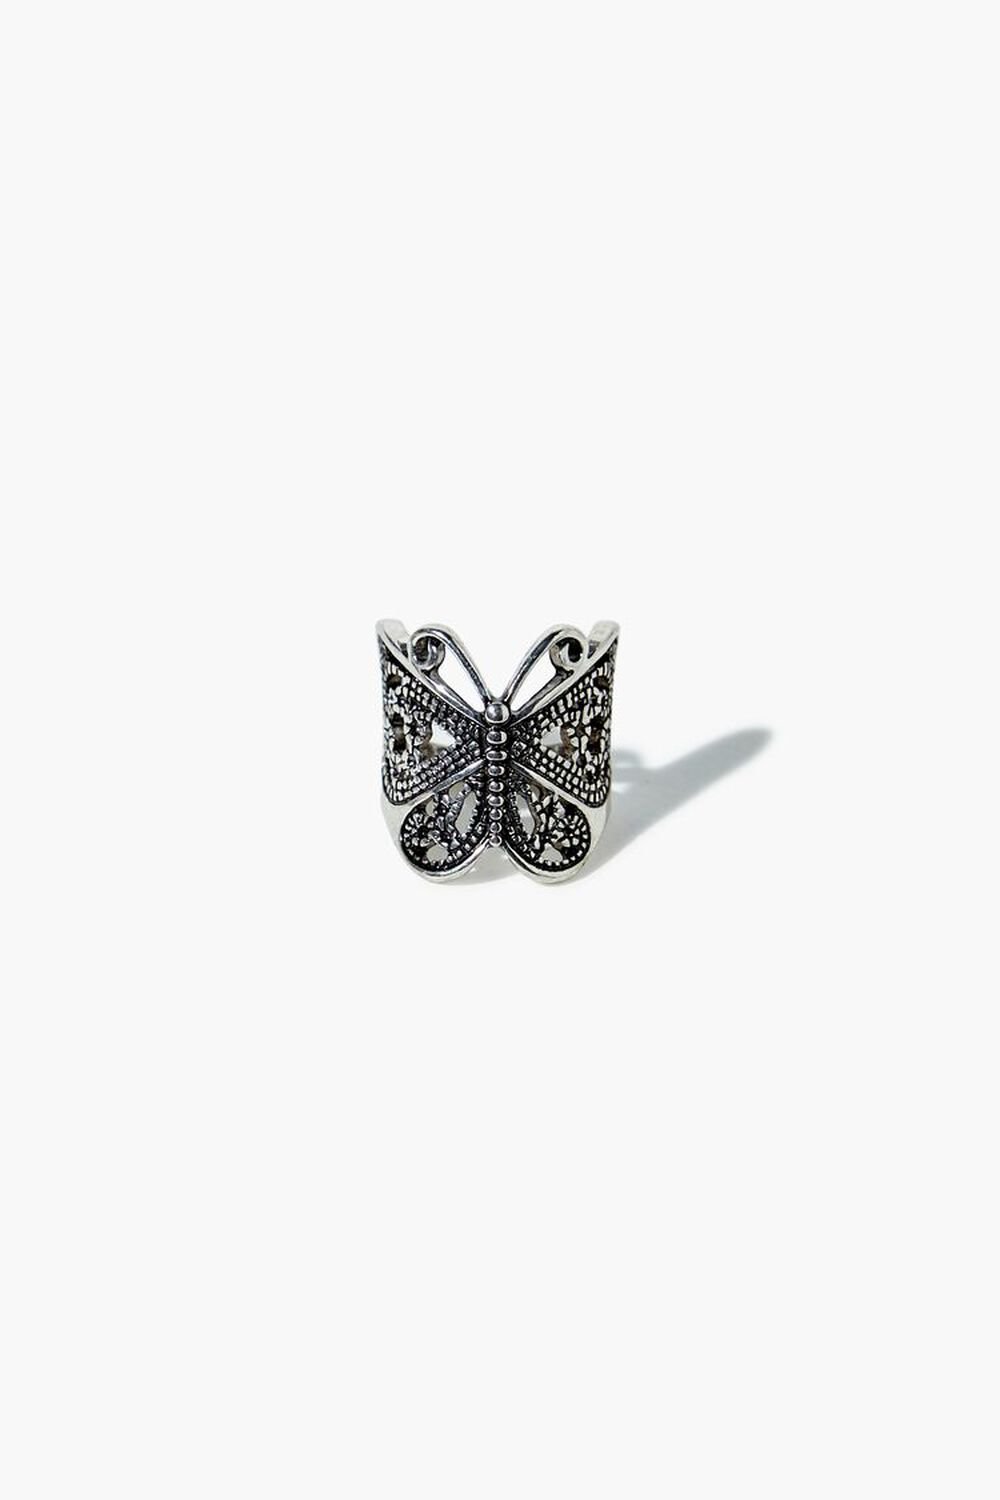 SILVER Butterfly Cocktail Ring, image 1